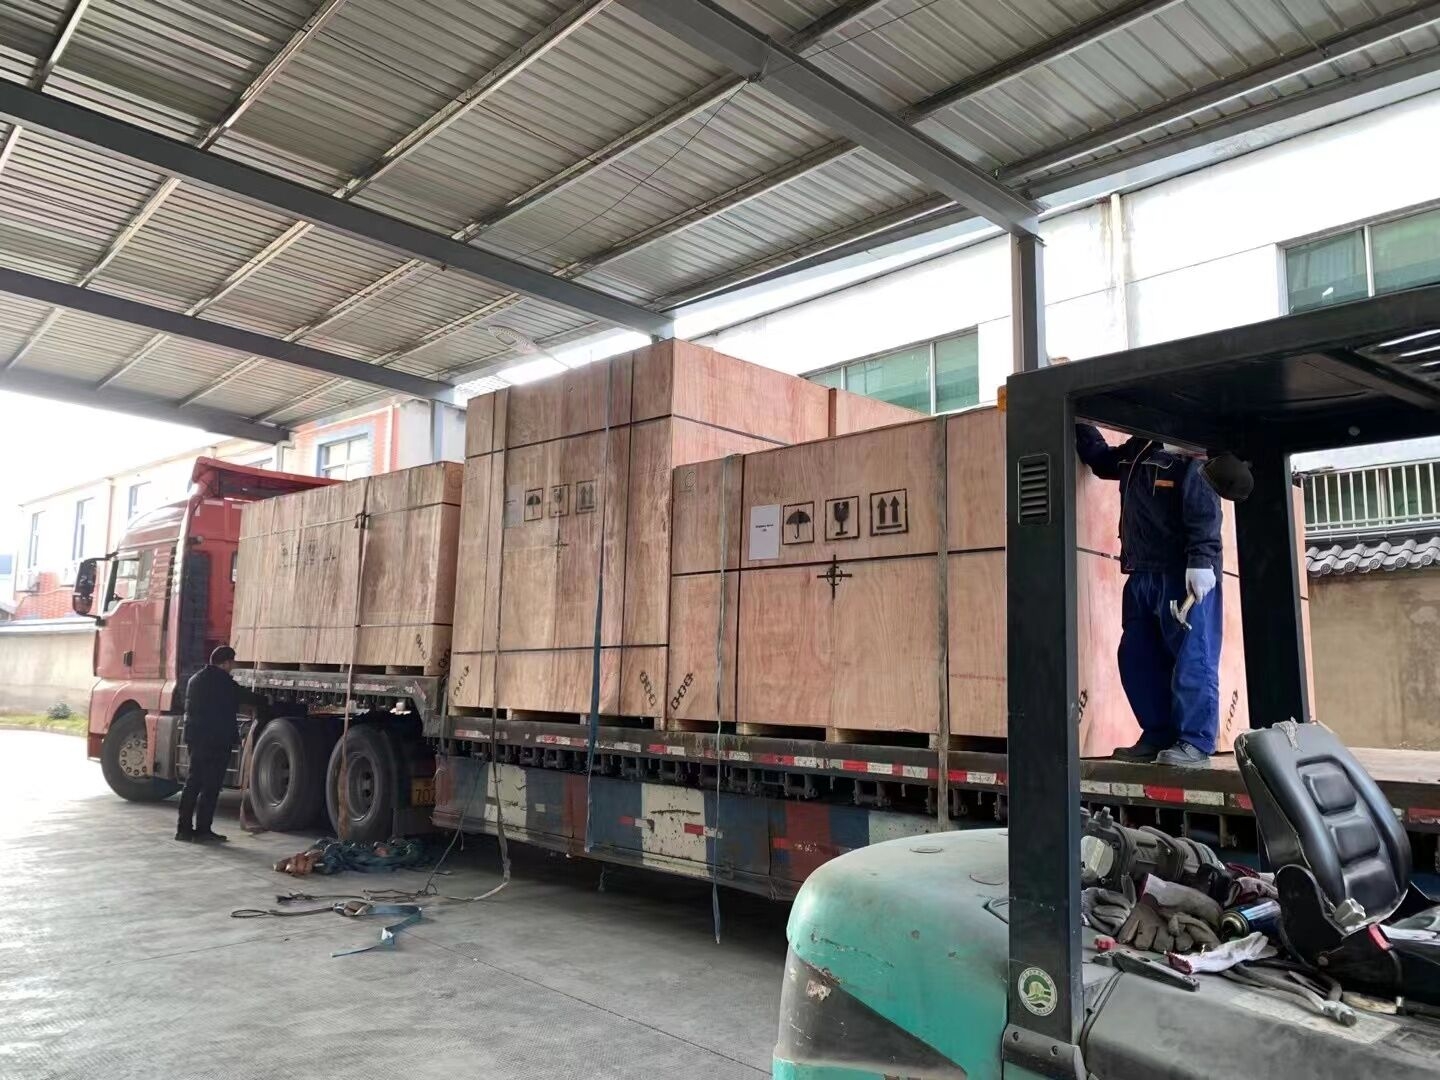 130M3 /h oxyegn generator  will  be shipped  to England